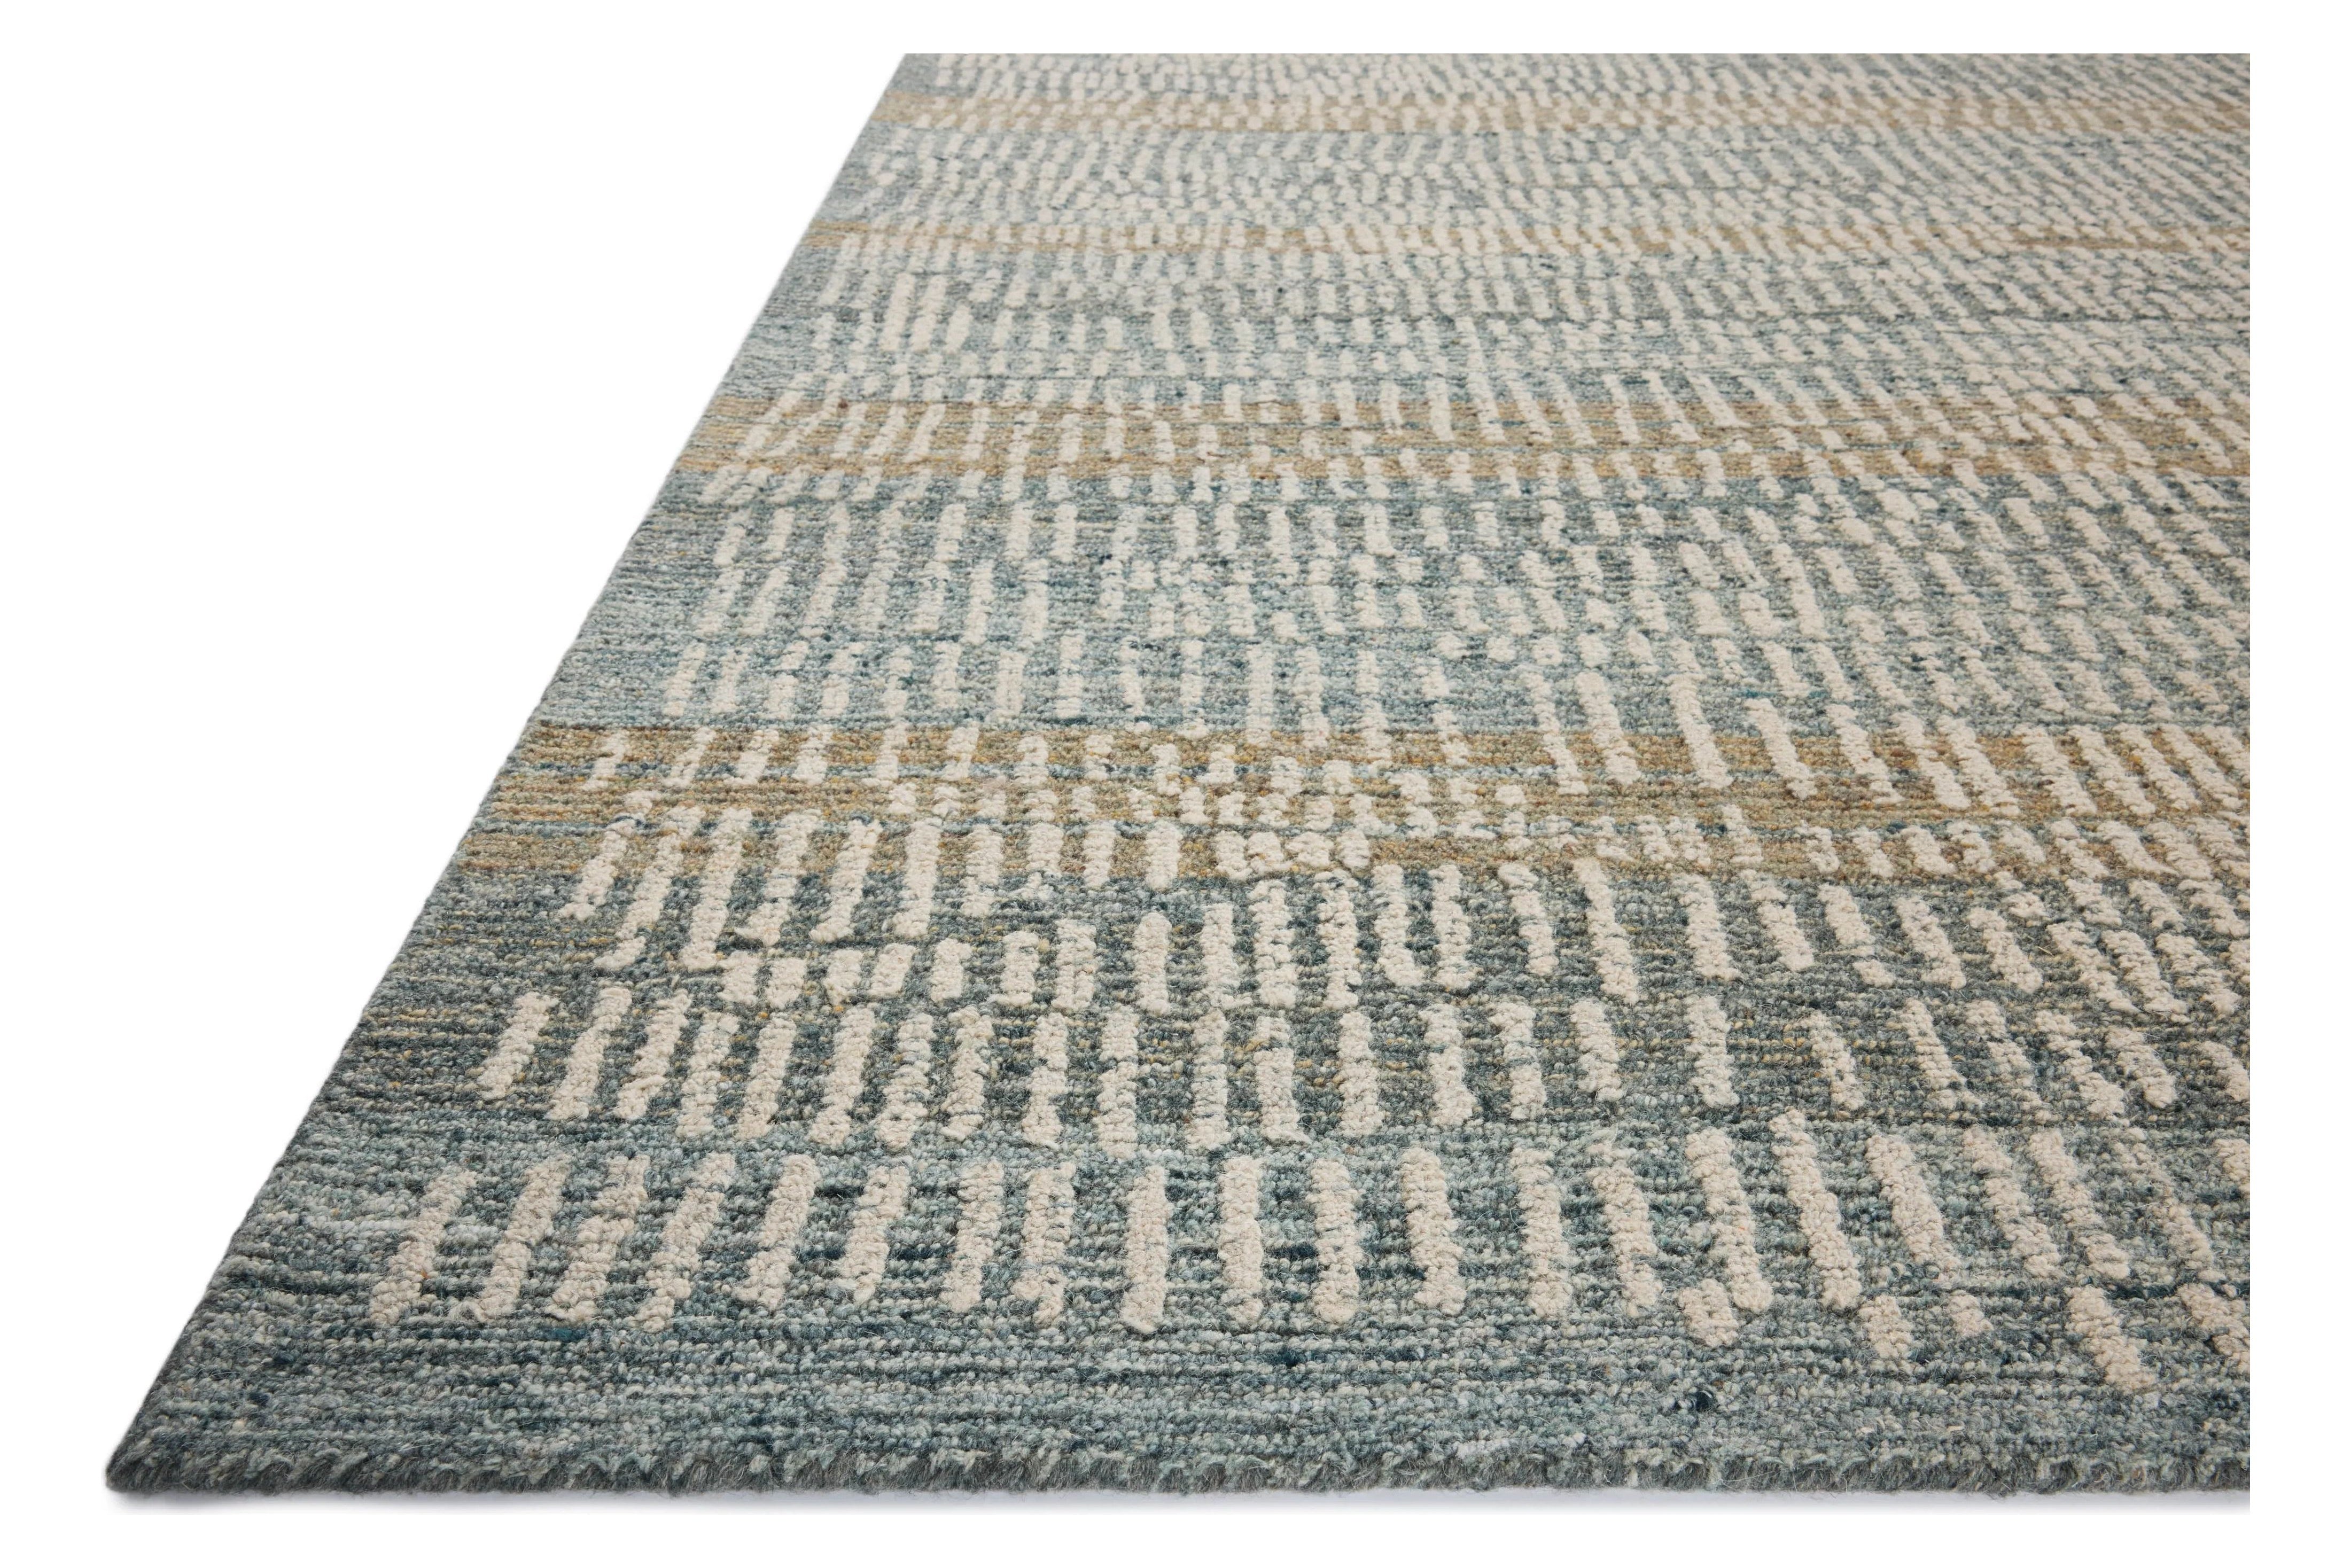 The Elias Ocean / Oatmeal Rug is a hand-tufted wool area rug with lively graphic patterns in earth and stone tones. There’s a unique texture to the rug made by over-tufting, in which a design is hand-tufted over a tufted base, creating a subtle high-low pile. Amethyst Home provides interior design, new home construction design consulting, vintage area rugs, and lighting in the Laguna Beach metro area.